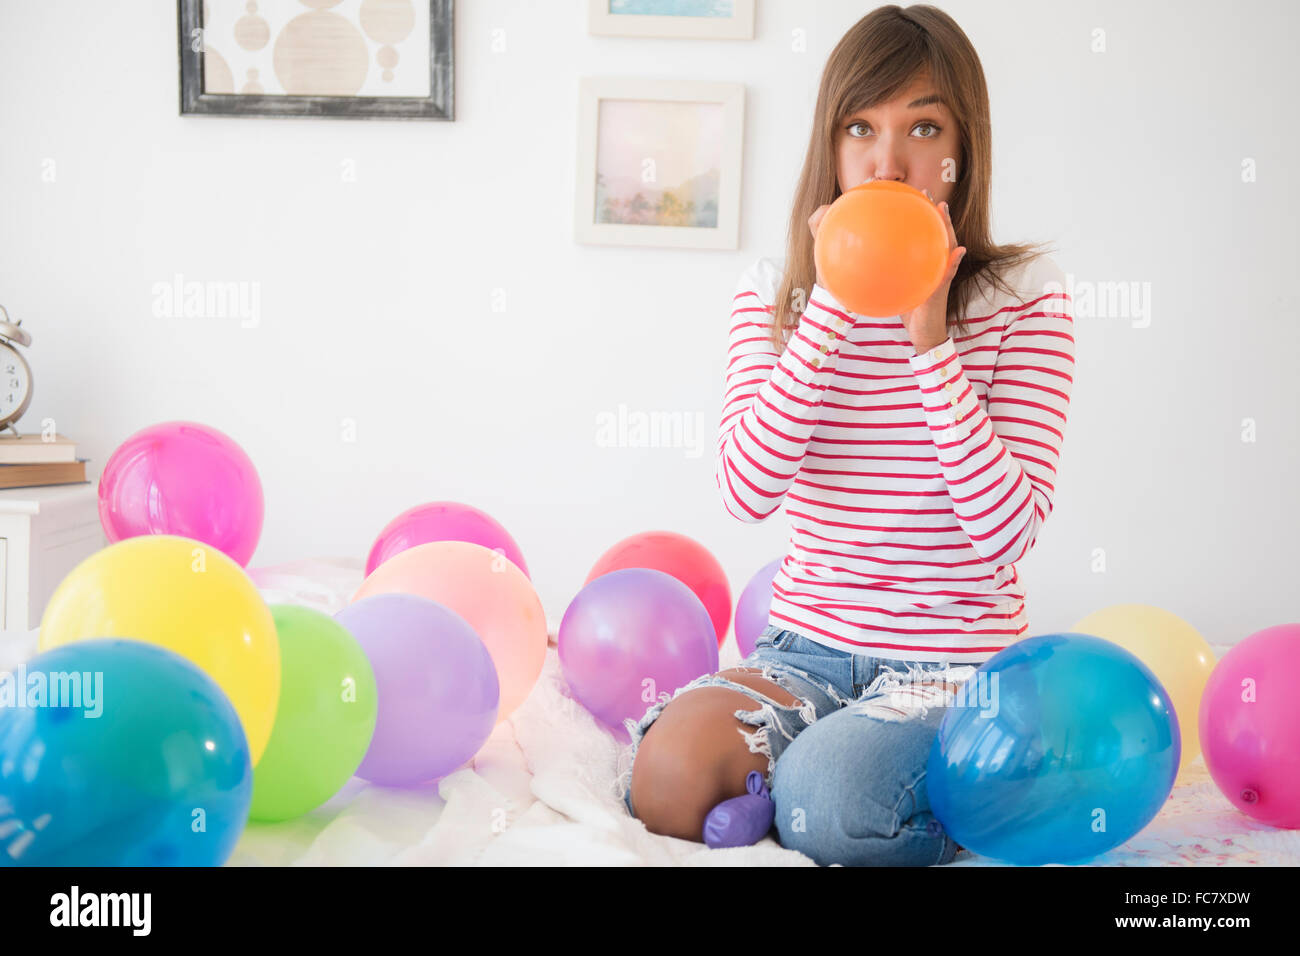 Mixed race woman blowing up balloons Stock Photo